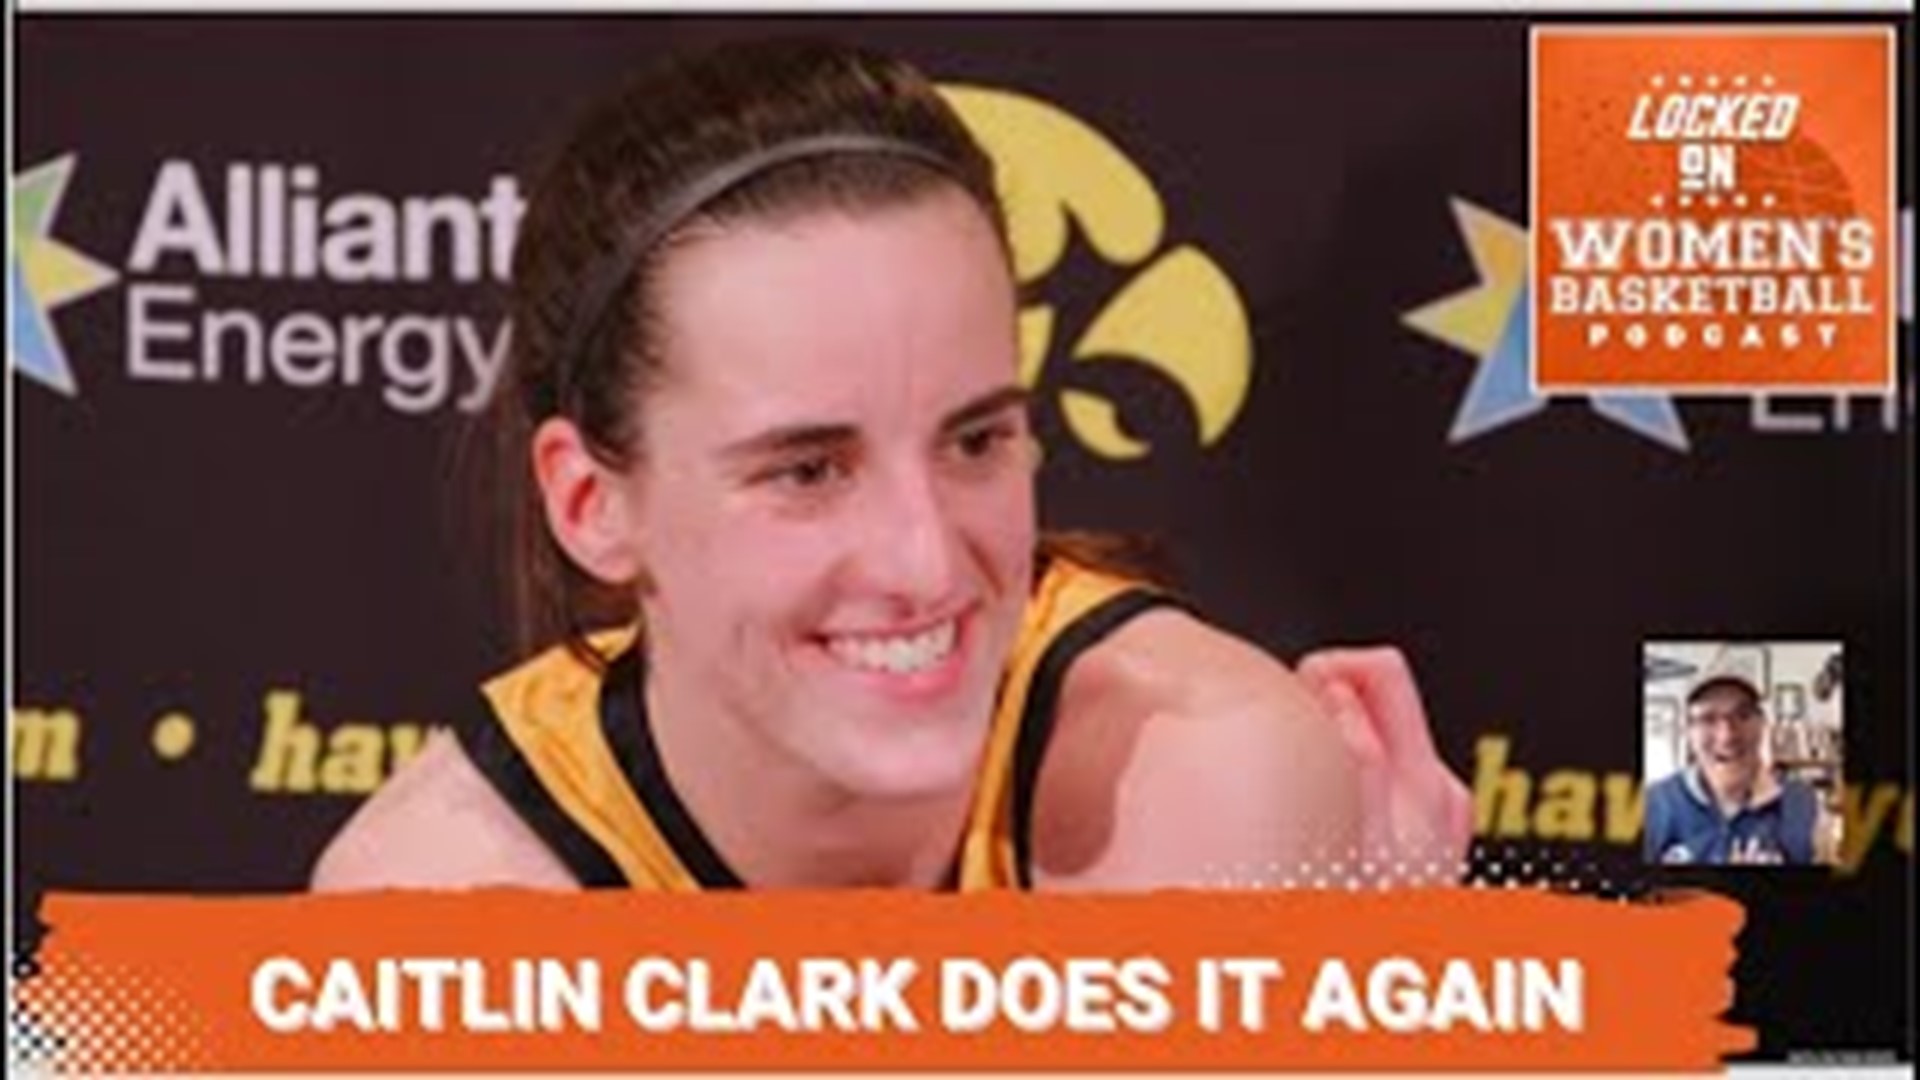 Host Howard Megdal breaks down the final play in Caitlin Clark's 40-point performance against Michigan State, including a game-winner that will be talked about.